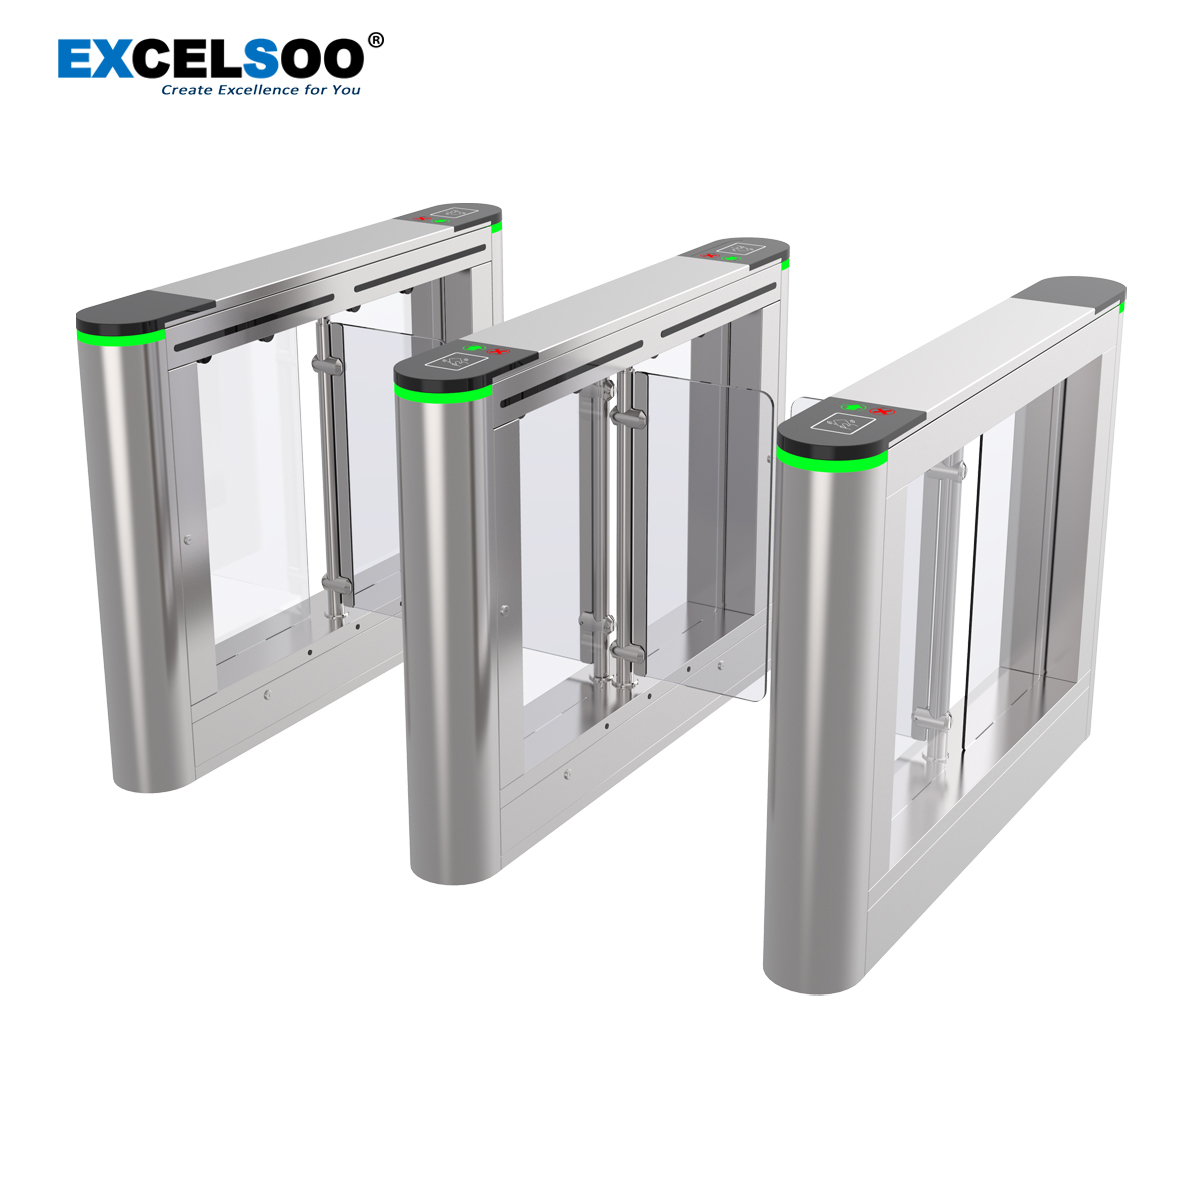 Excelsoo Luxury Swing Barrier SWGB312 for CBD Office Building